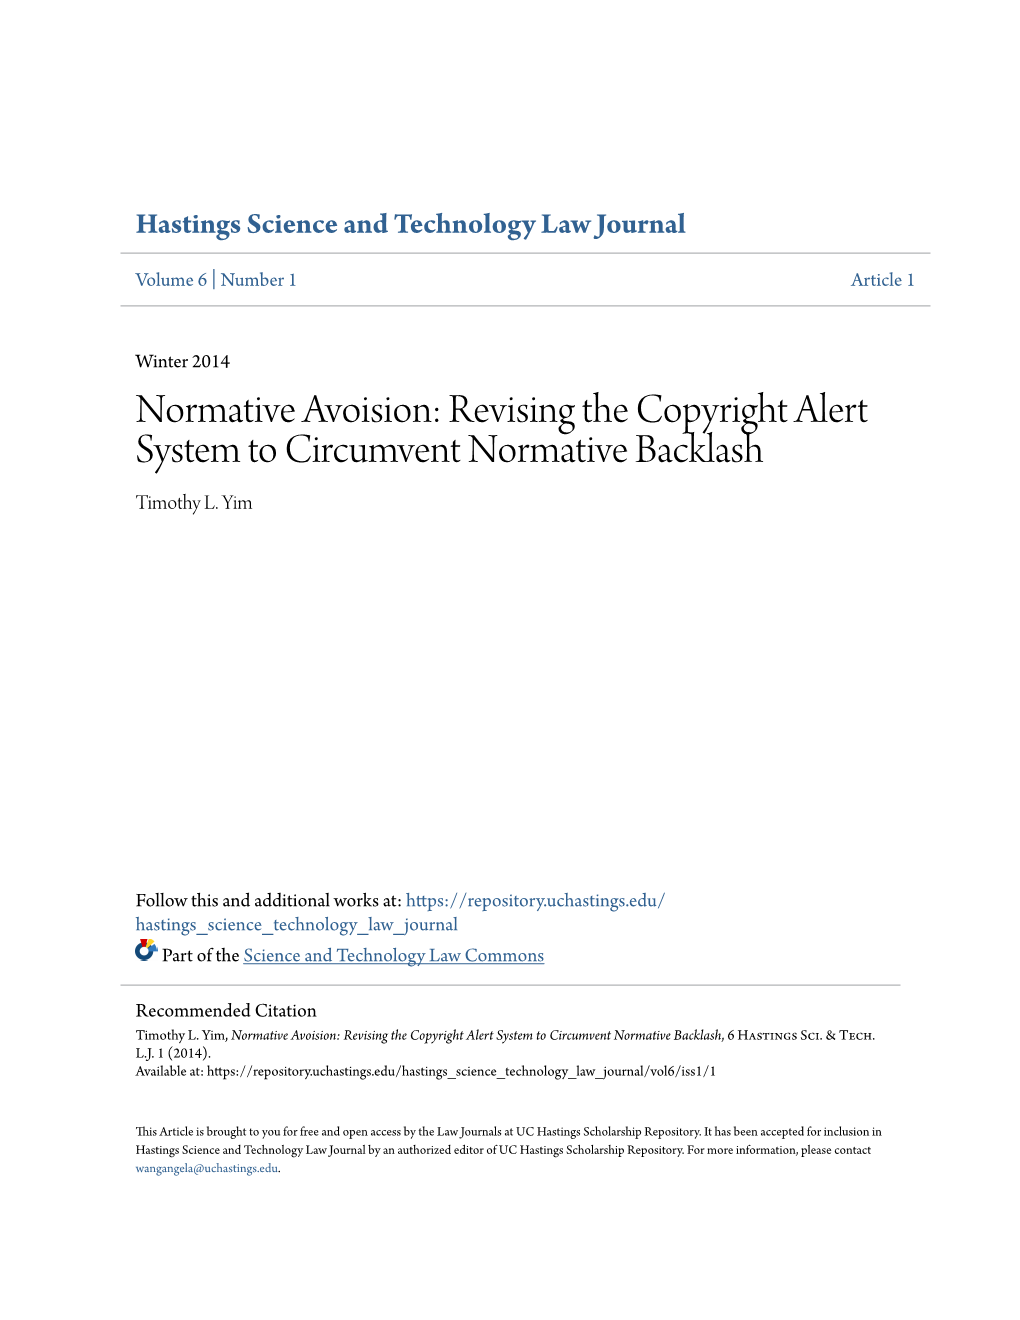 Normative Avoision: Revising the Copyright Alert System to Circumvent Normative Backlash Timothy L